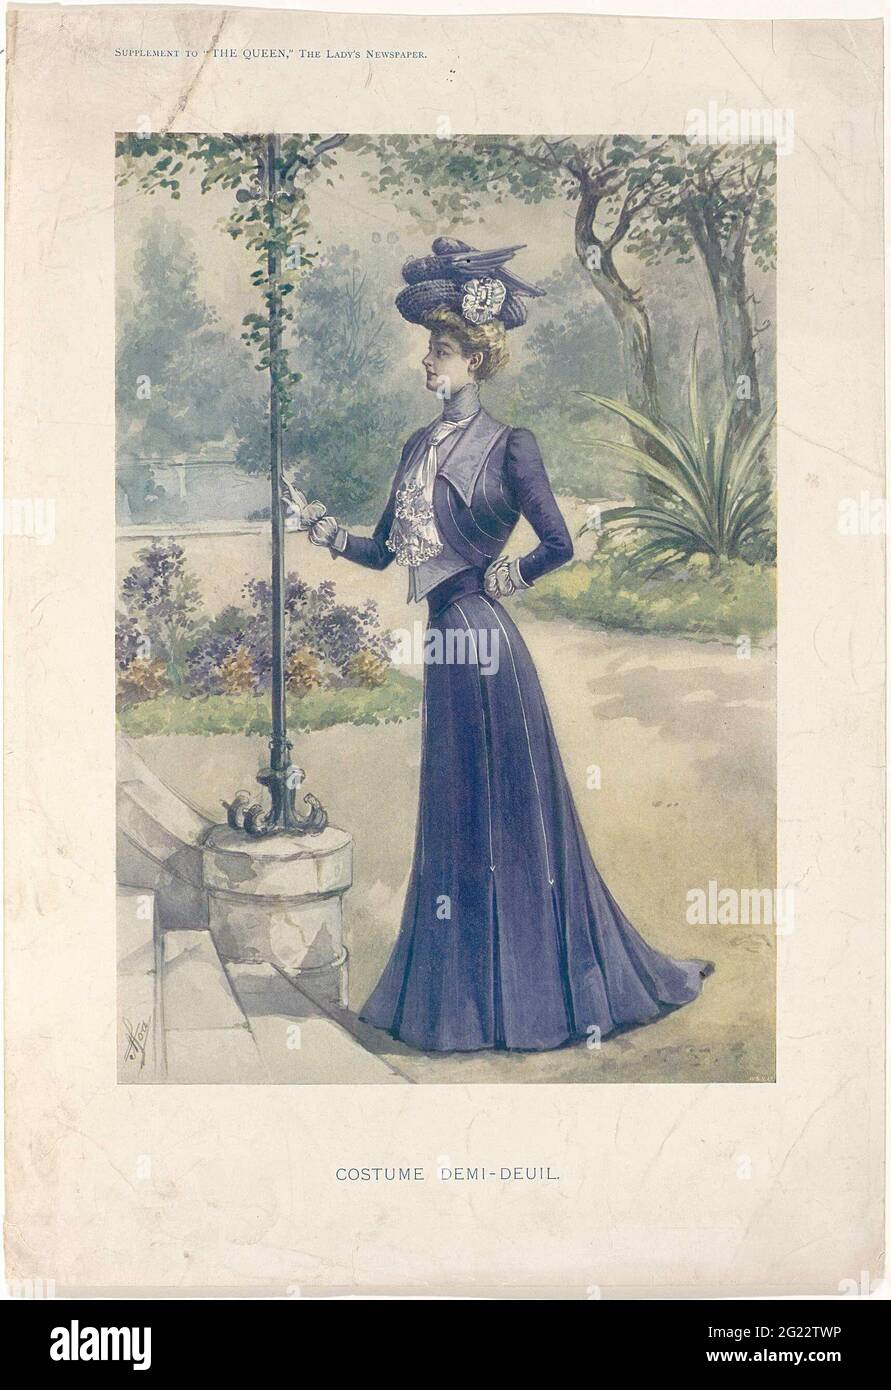 The Queen, The Lady's Newspaper, 1900: Costume Demi-Deul. Costume for half mourning: dark purple jacket with rounded fronts; Light purple flat pointed collar and cuffs. White tie. Puffing under-sleeving. Dark purple skirt with drag. Matching dark purple hat decorated with two wings and white bow. Print from the English fashion magazine 'The Queen' (1861-19 ..) Stock Photo